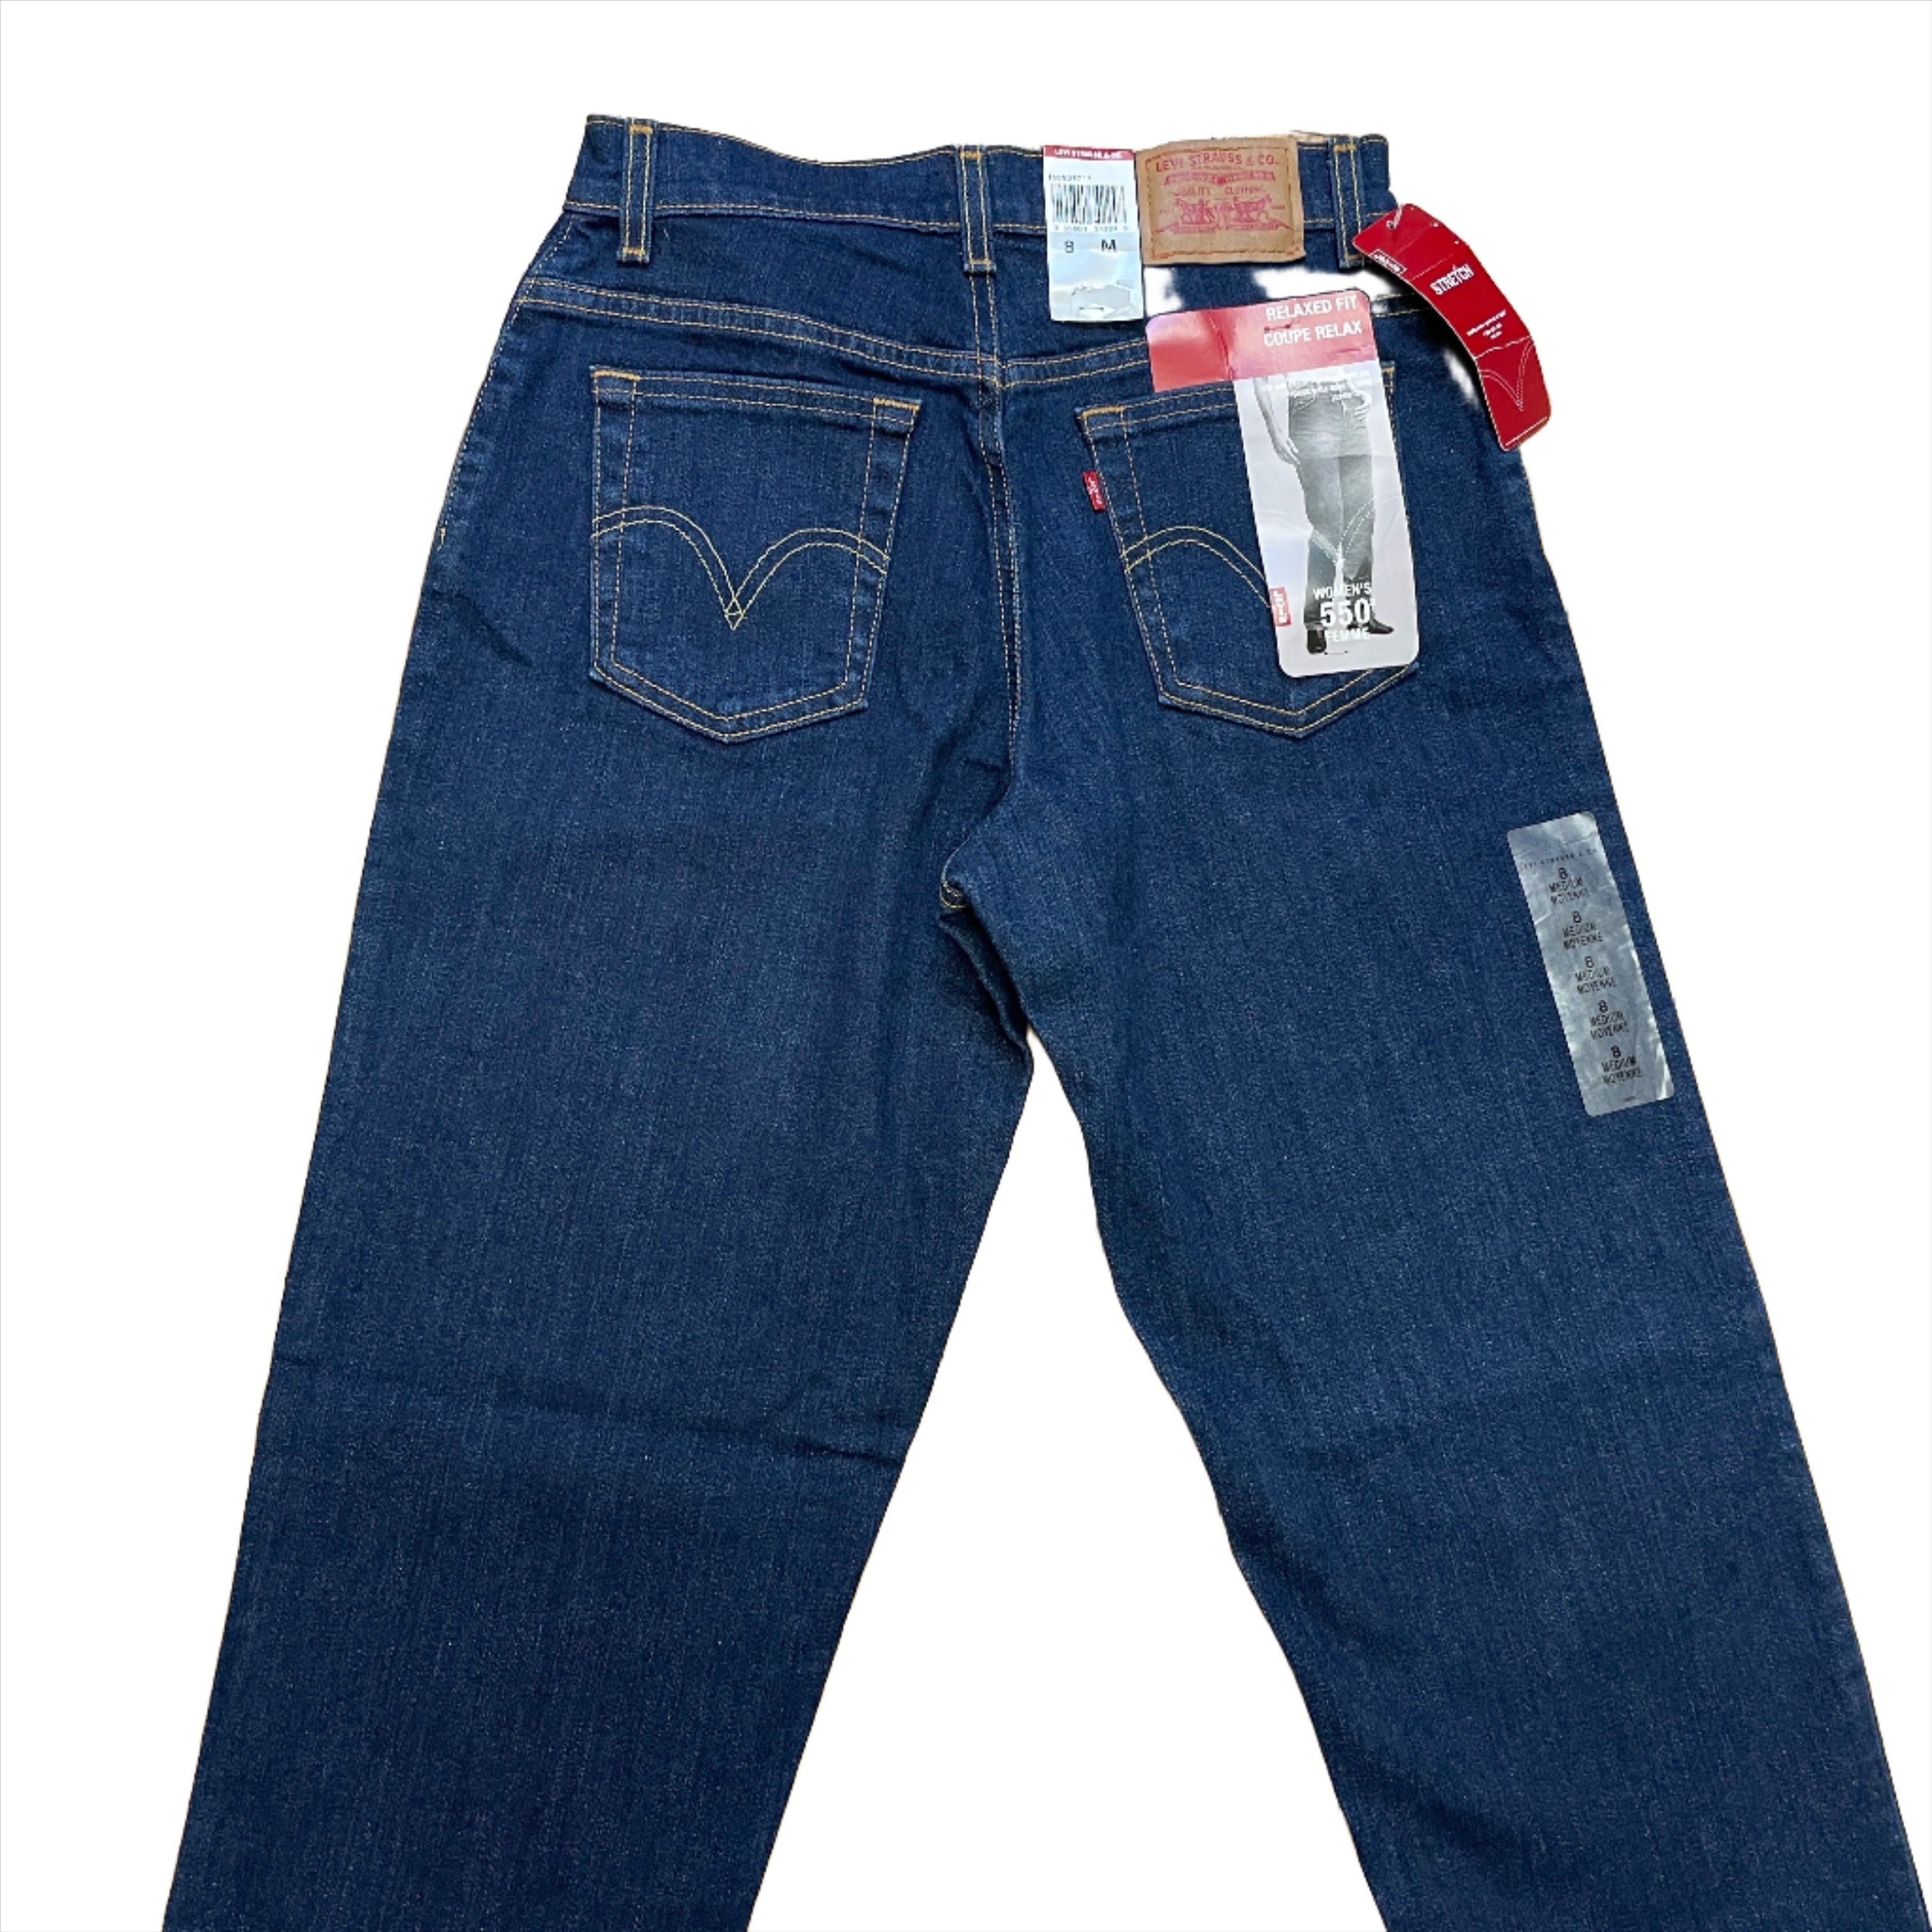 Vintage Levis Jeans Size 24-25 / Deadstock Levis 535 Jeans Light Wash  Deadstock with Tags 90s -  Portugal